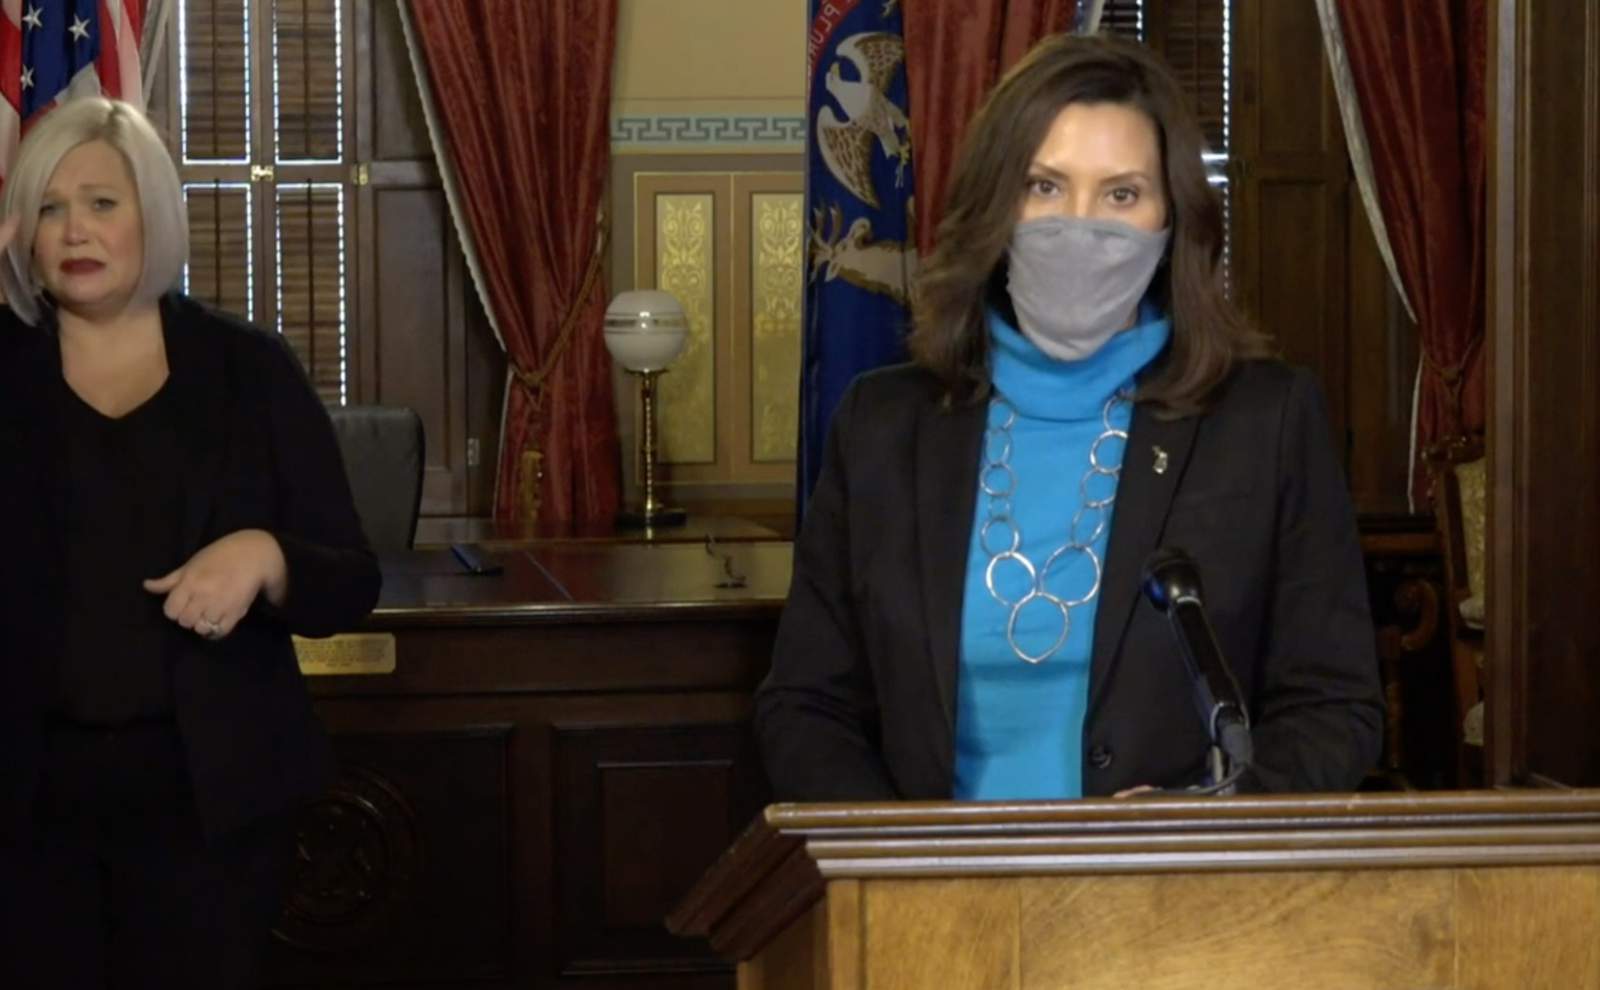 Michigan Gov. Whitmer on COVID-19: This is the moment medical experts have been dreading